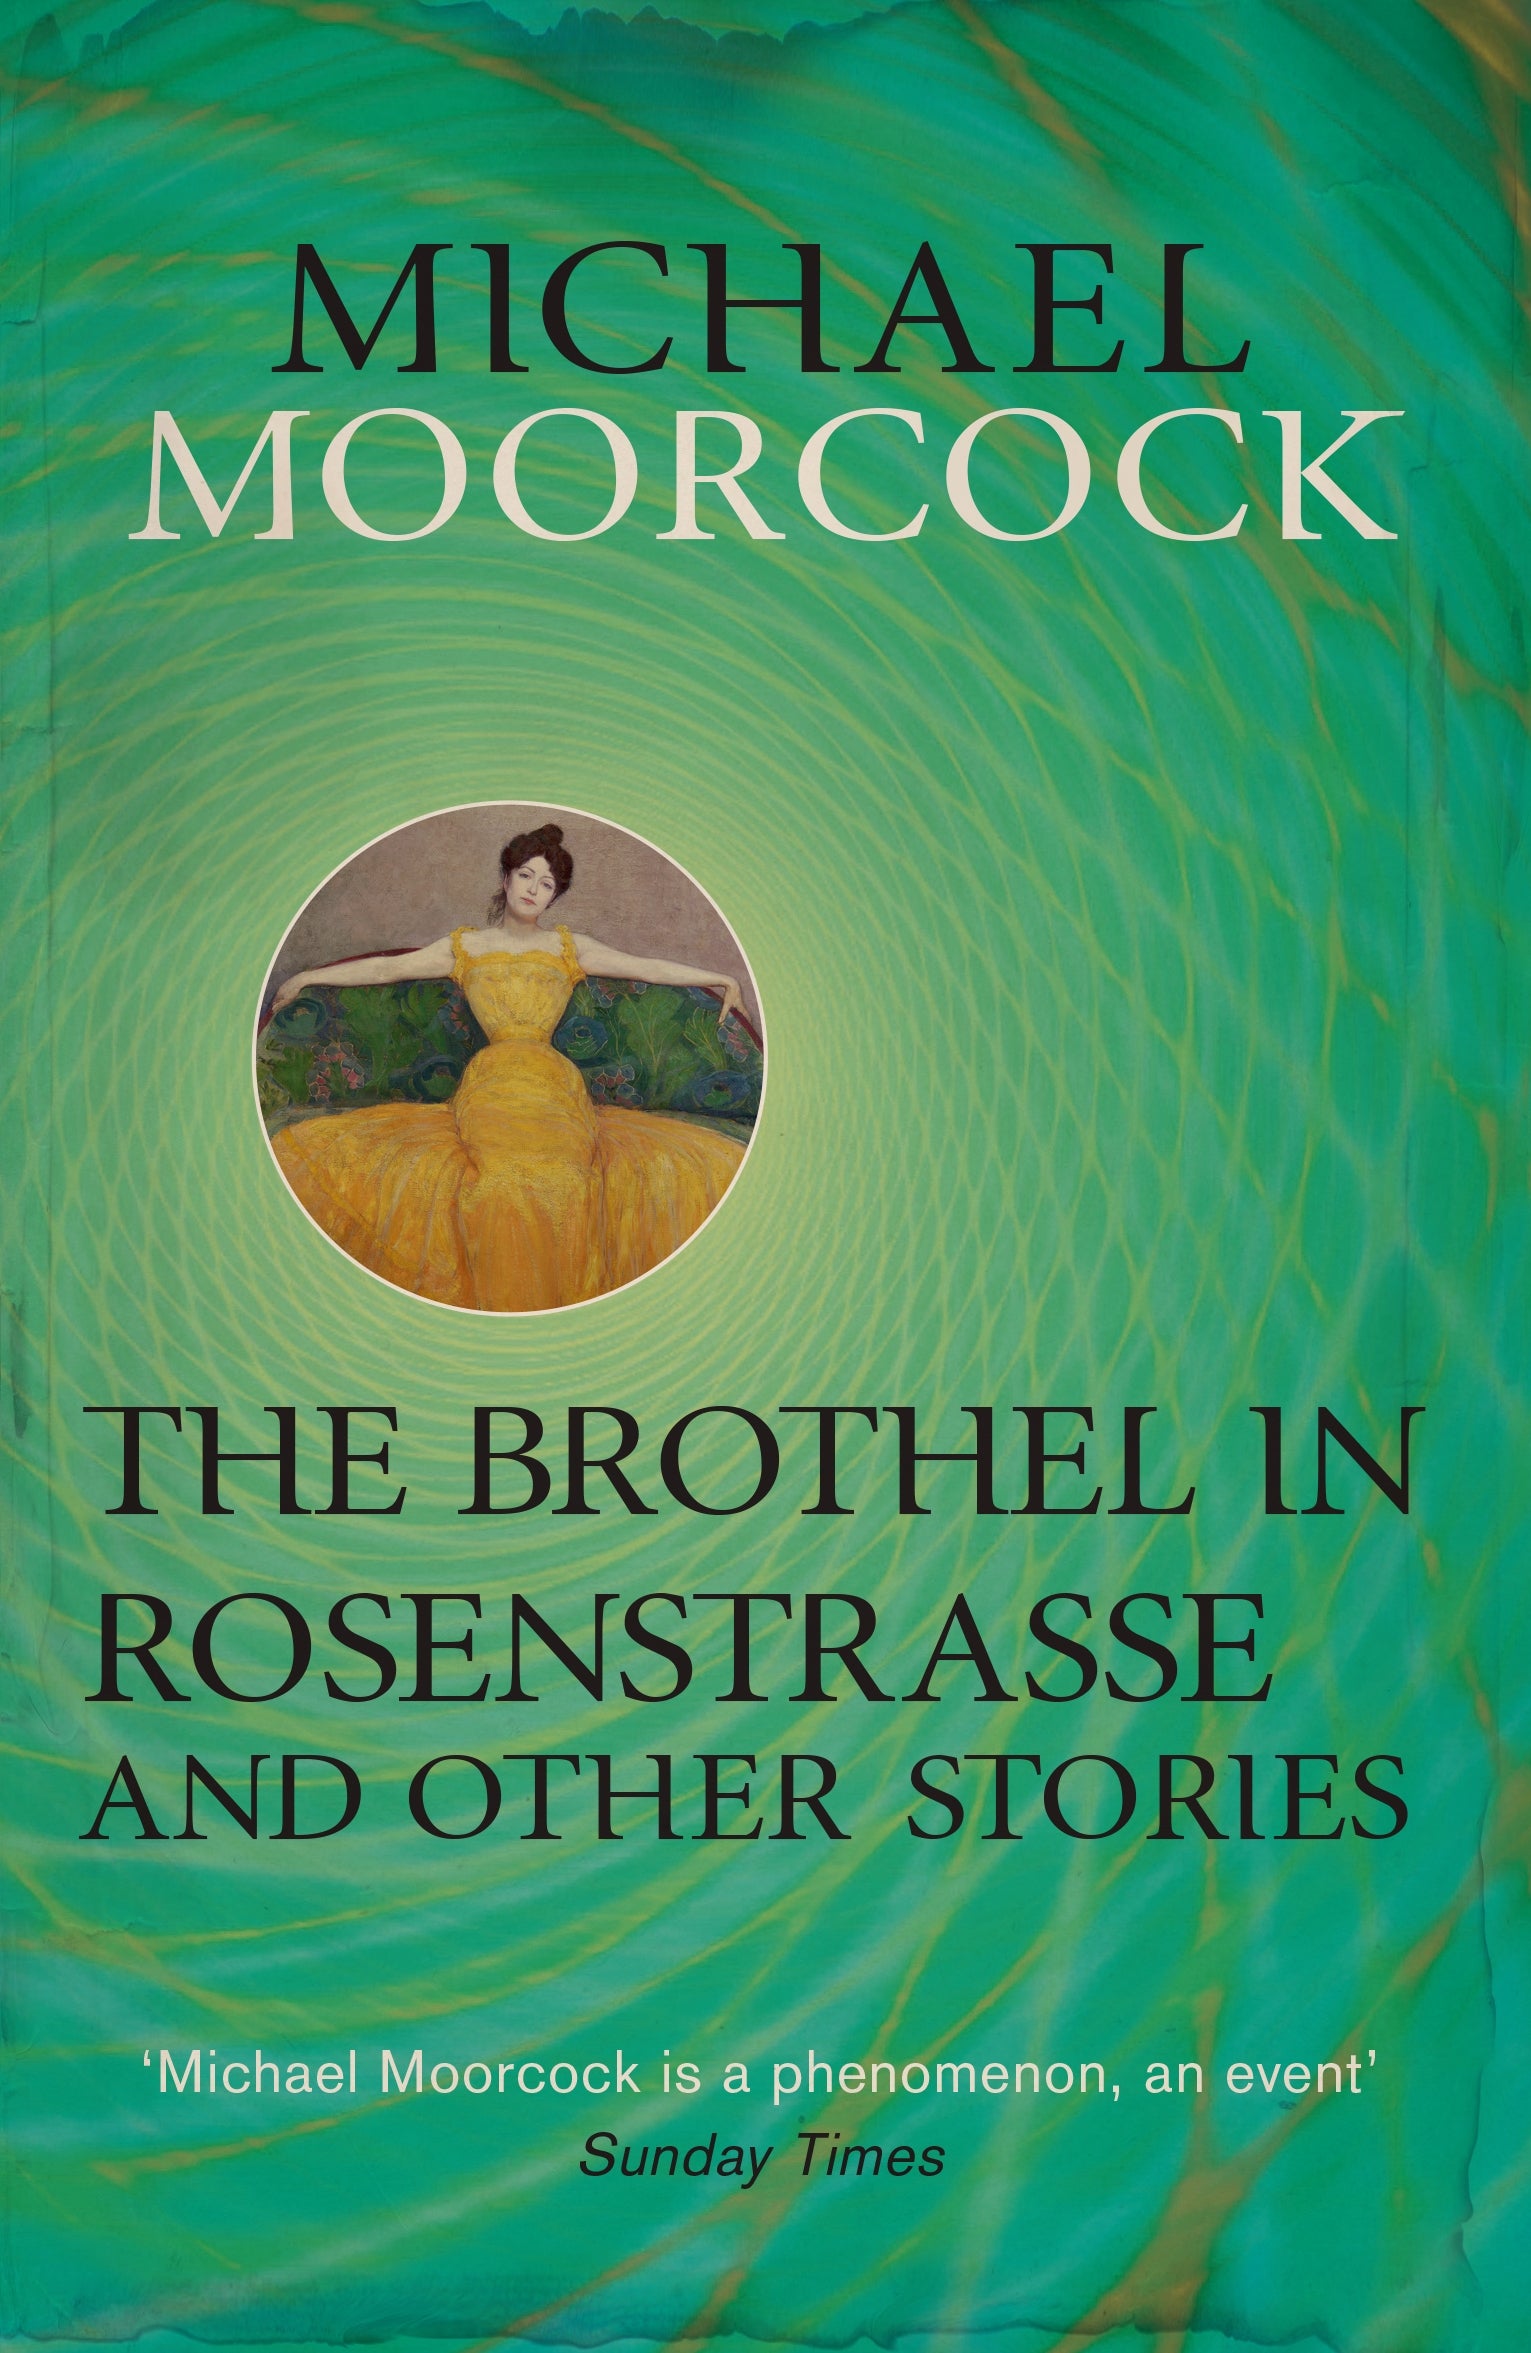 The Brothel in Rosenstrasse and Other Stories by Michael Moorcock